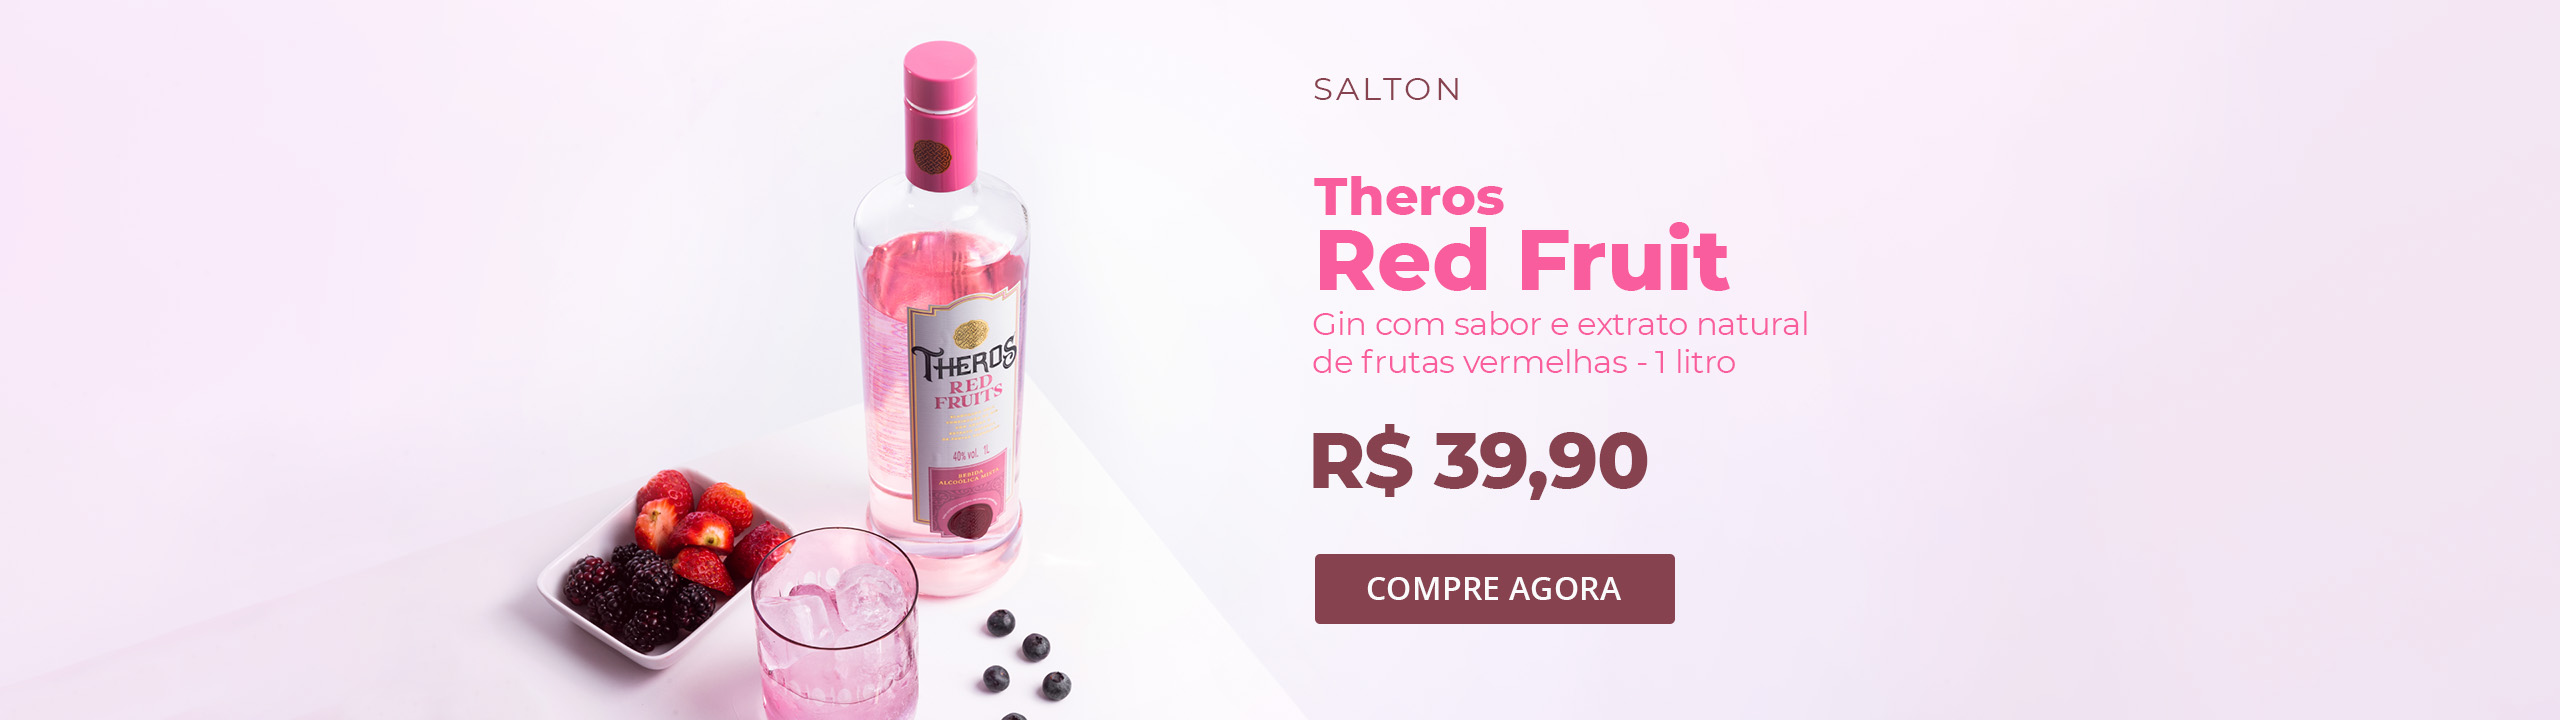 Salton Theros Gin Red Fruits 1L